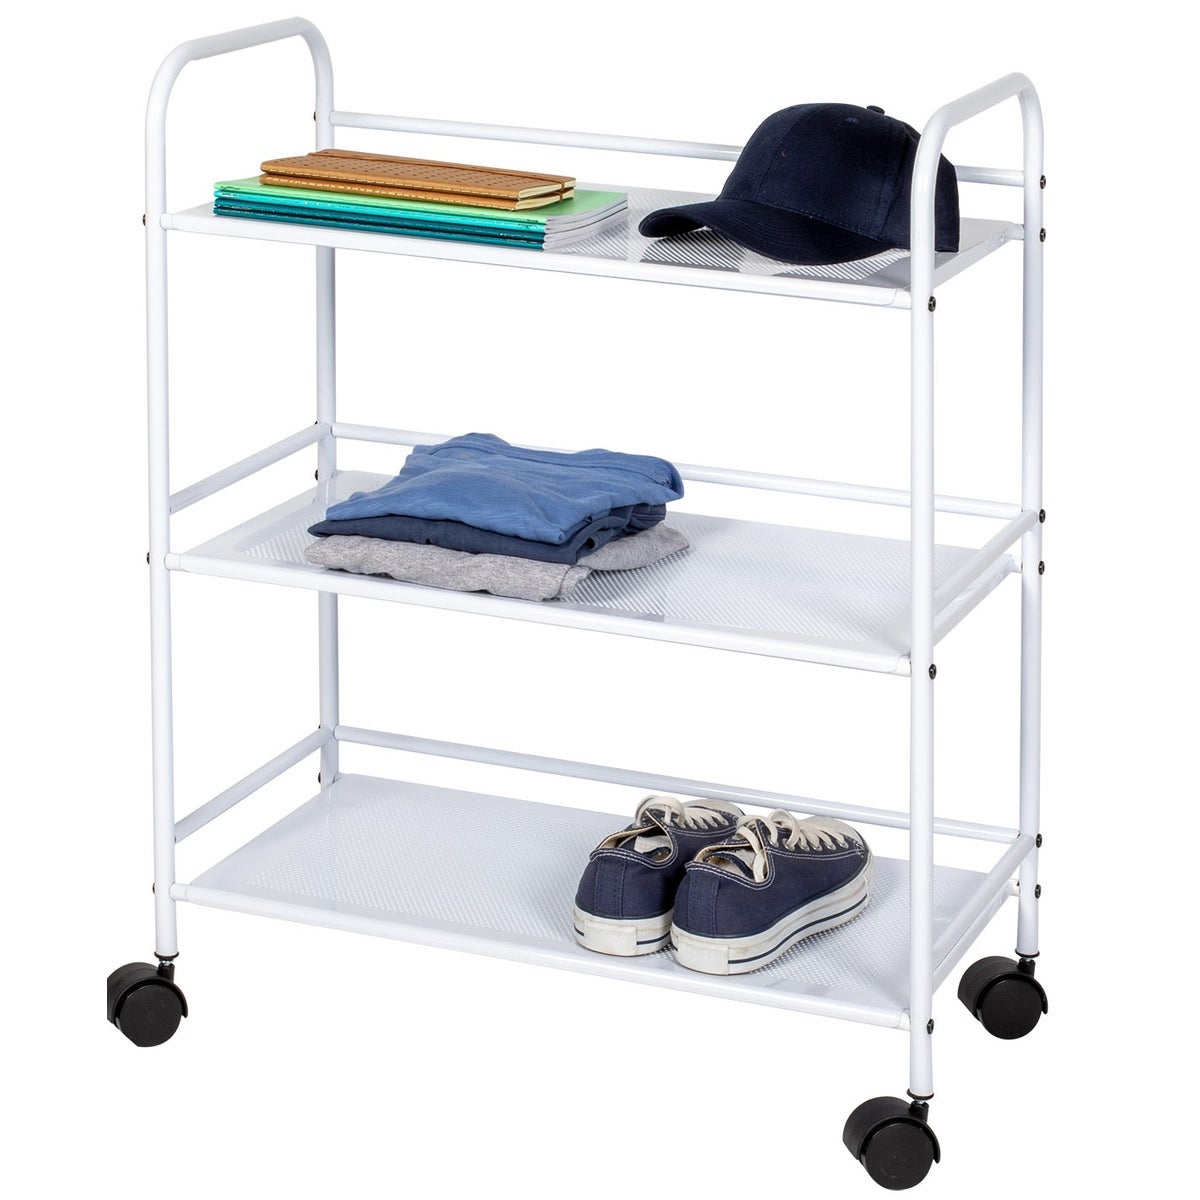 White/White - 3 Tier Rolling Cart (1)